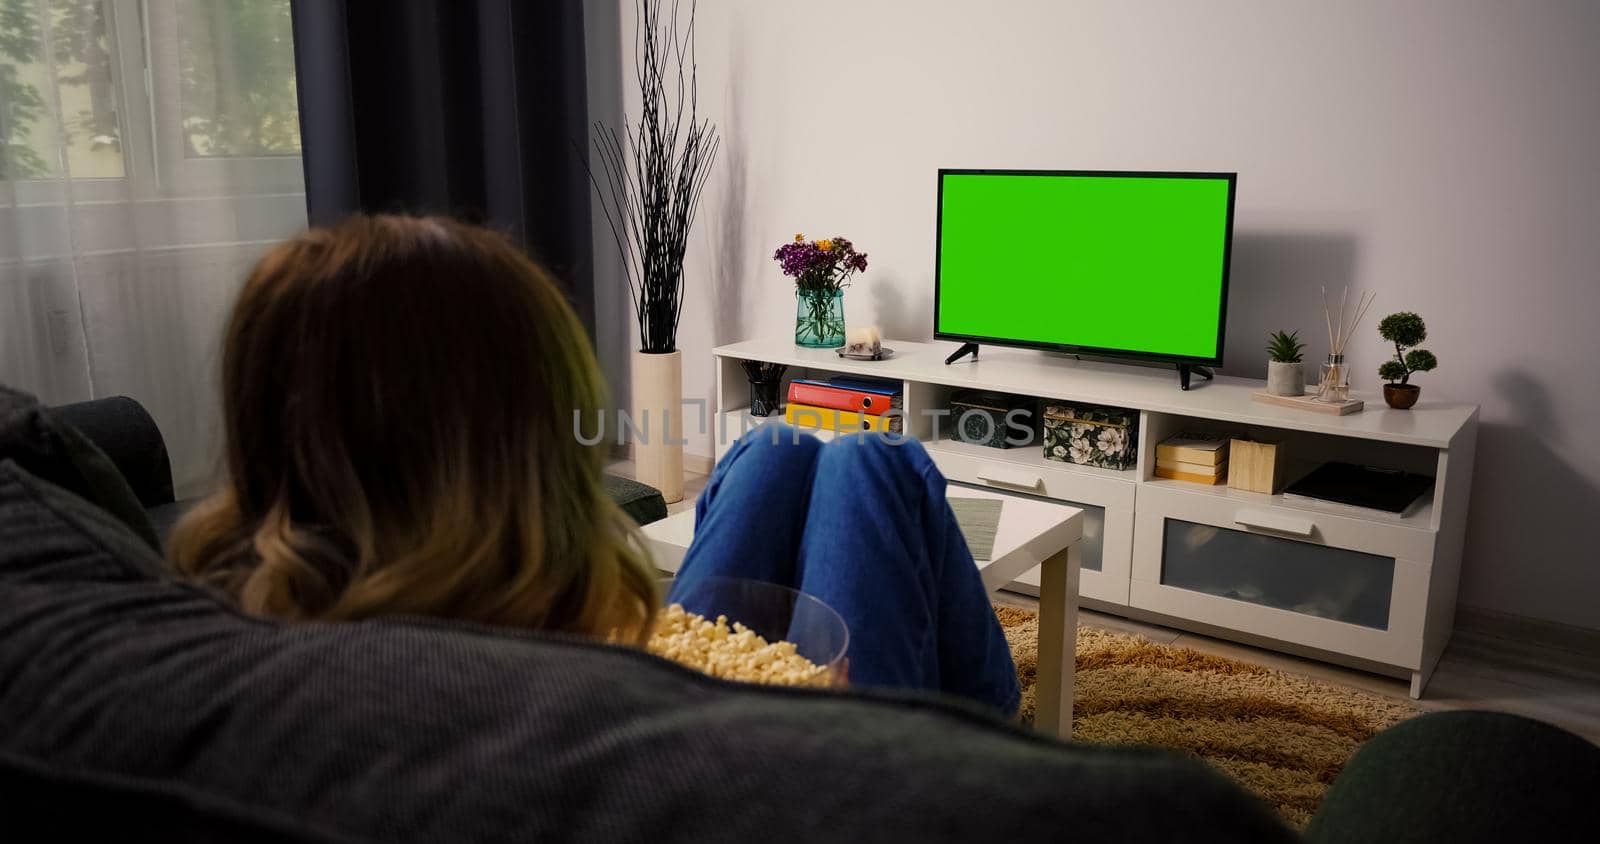 Woman Sitting on a Couch Home Watching Green Chroma Key Screen, Relaxing. Girl in a Cozy Room Watching Sports Match, News, Sitcom TV Show or a Movie on Green Screen eating popcorn.